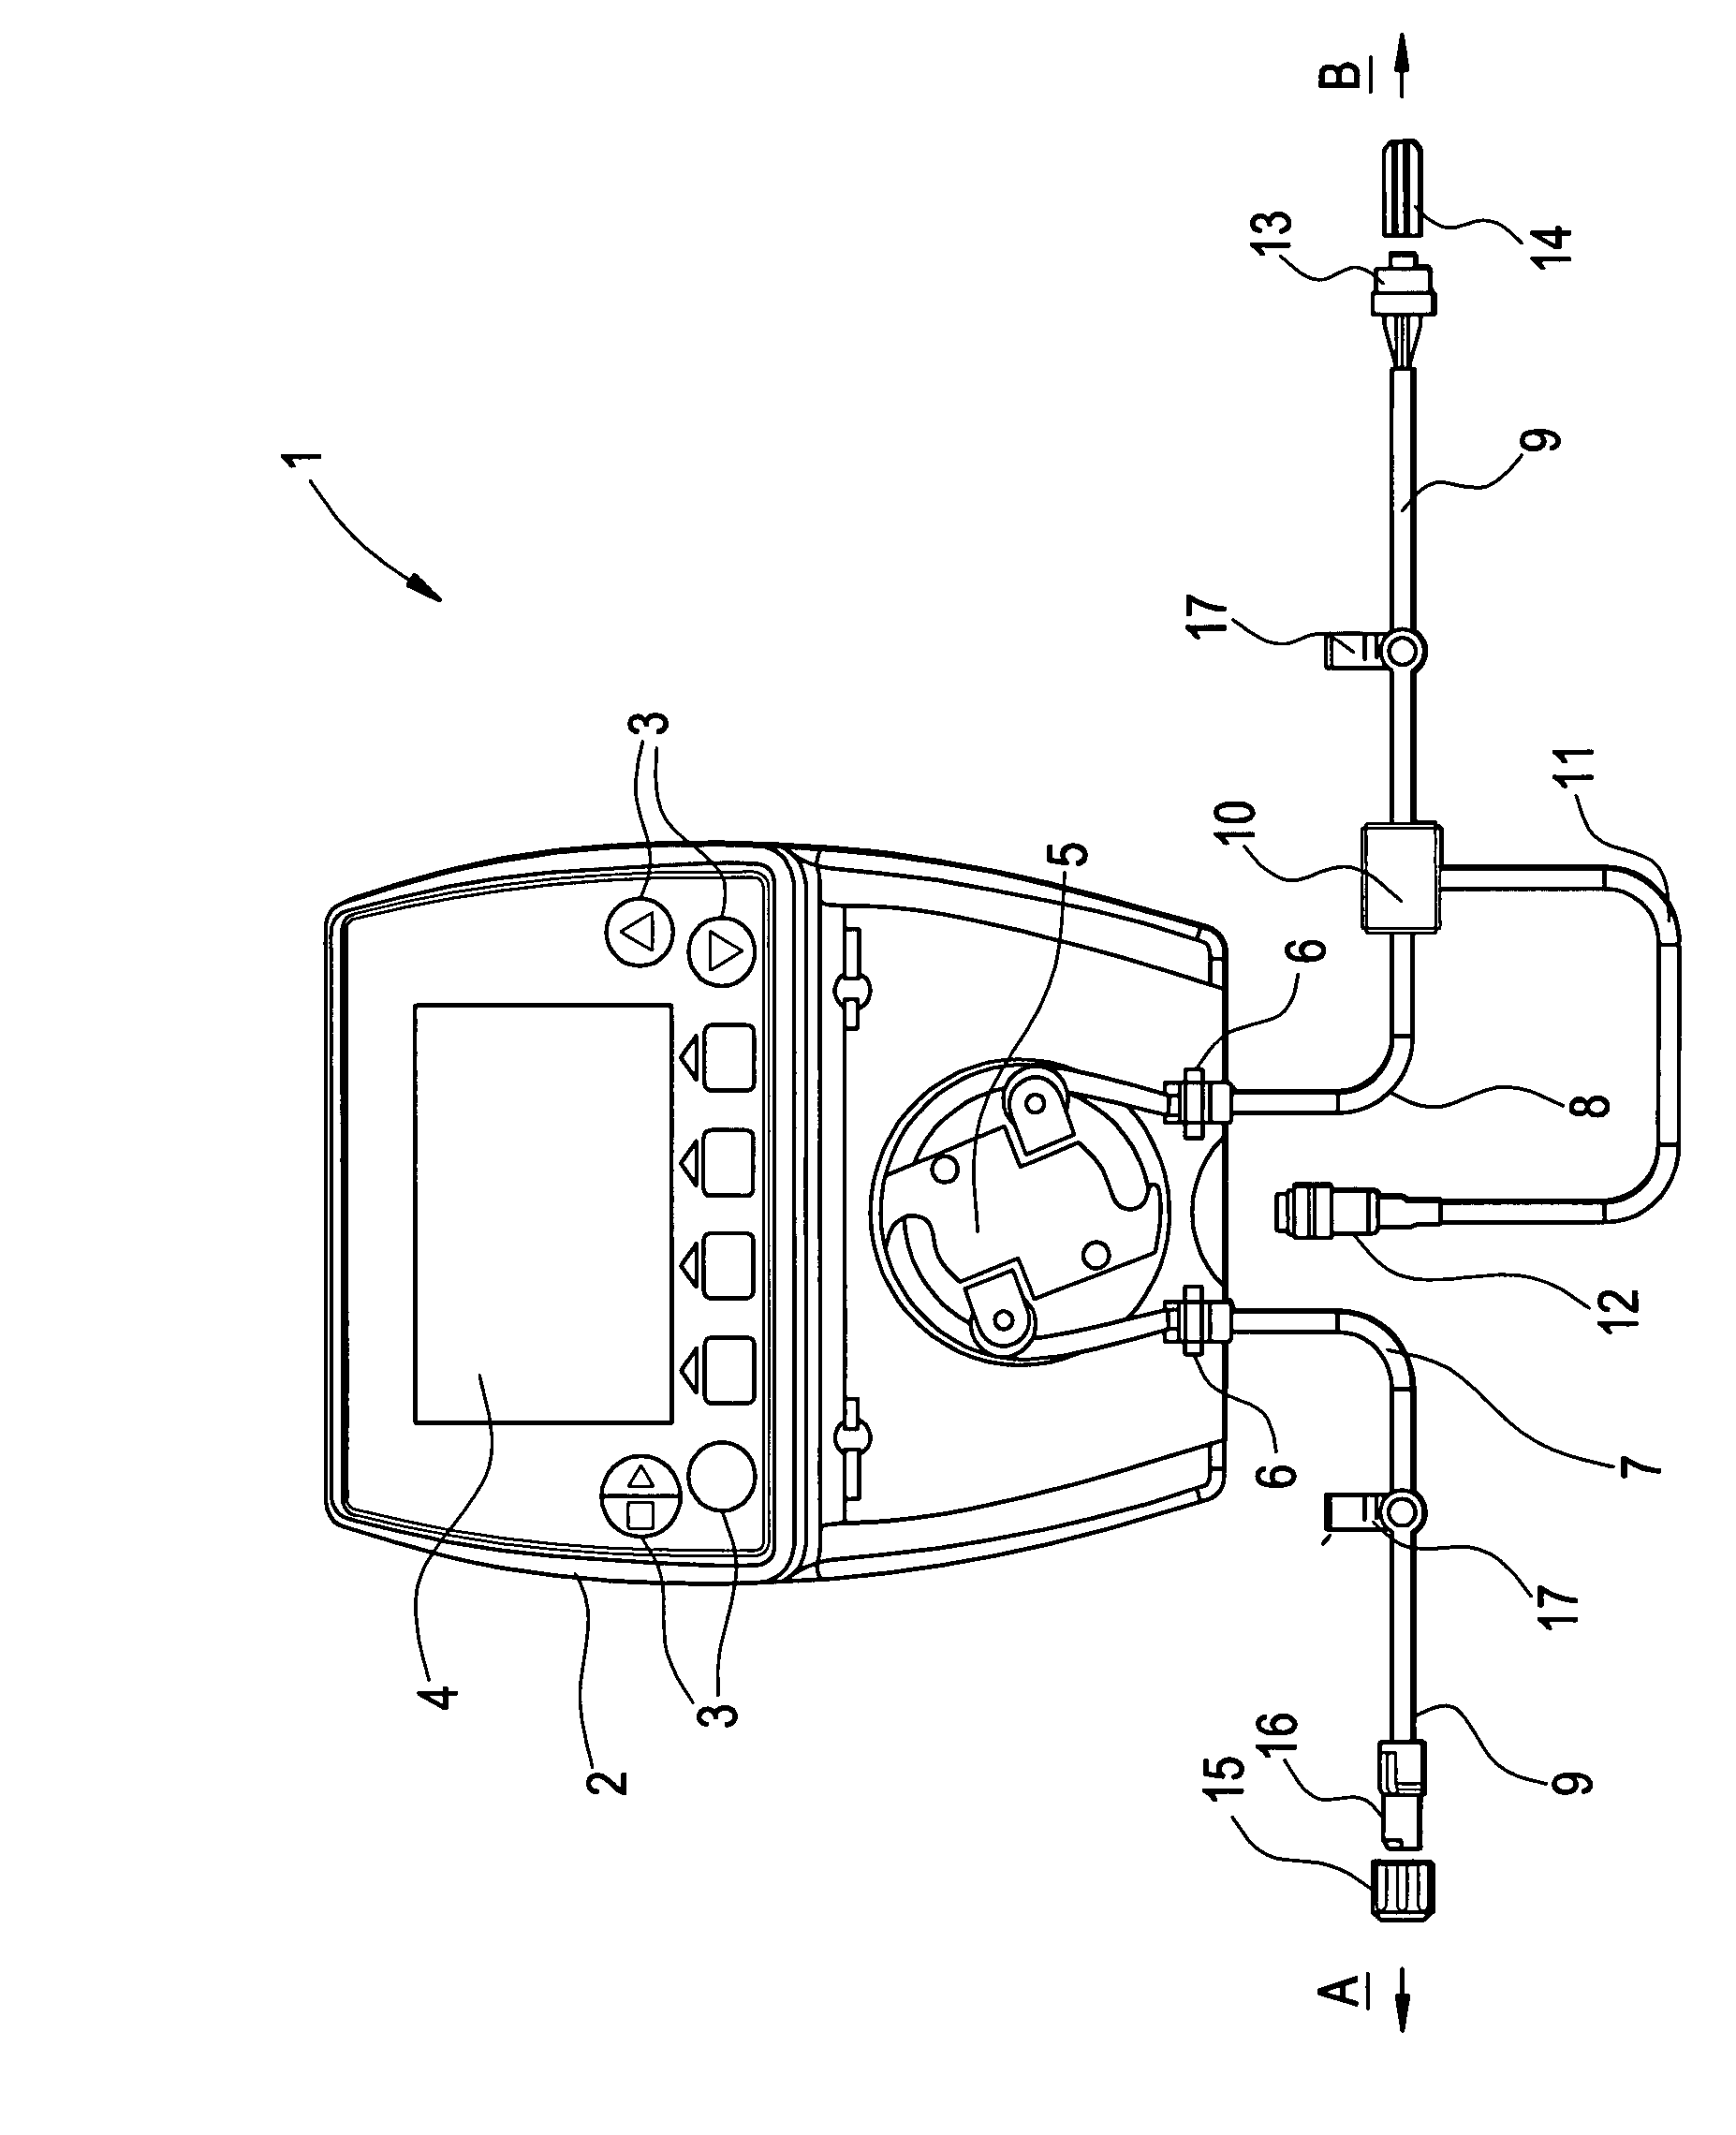 Drainage system for cerebrospinal fluid